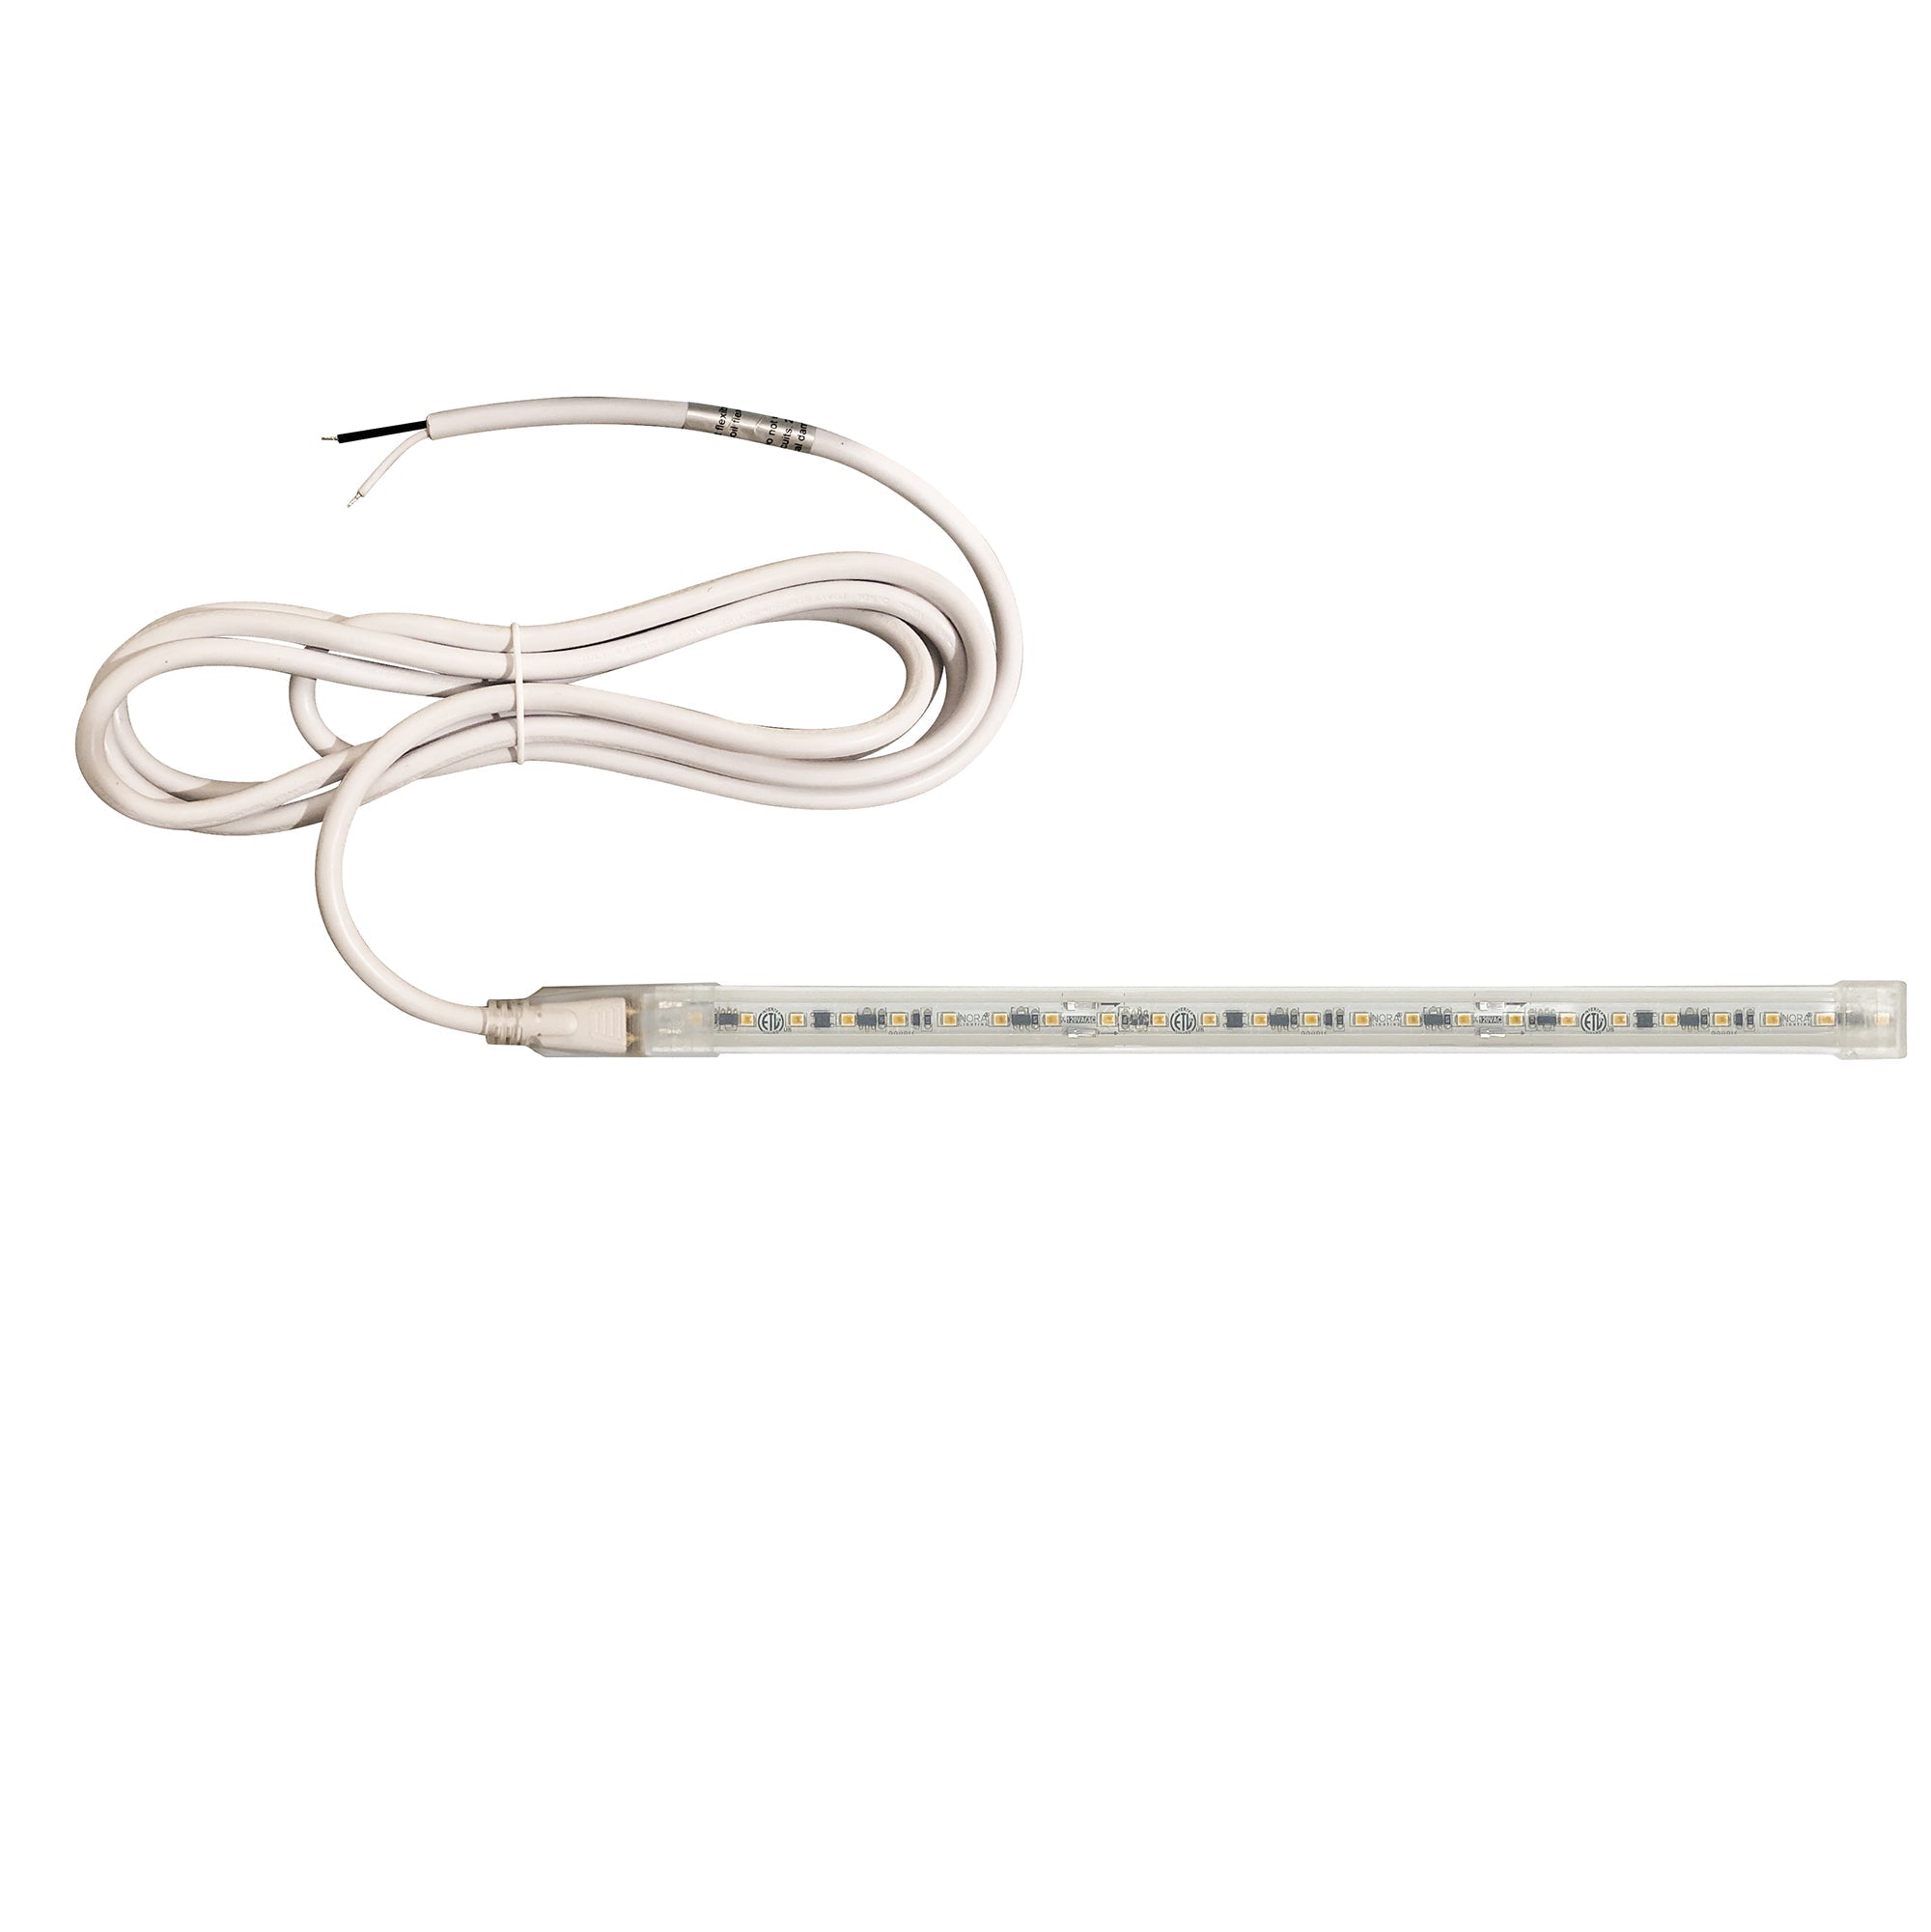 Nora Lighting NUTP13-W53-8-12-930/HW - Accent / Undercabinet - Custom Cut 53-ft, 8-in 120V Continuous LED Tape Light, 330lm / 3.6W per foot, 3000K, w/ Mounting Clips and 8' Hardwired Power Cord